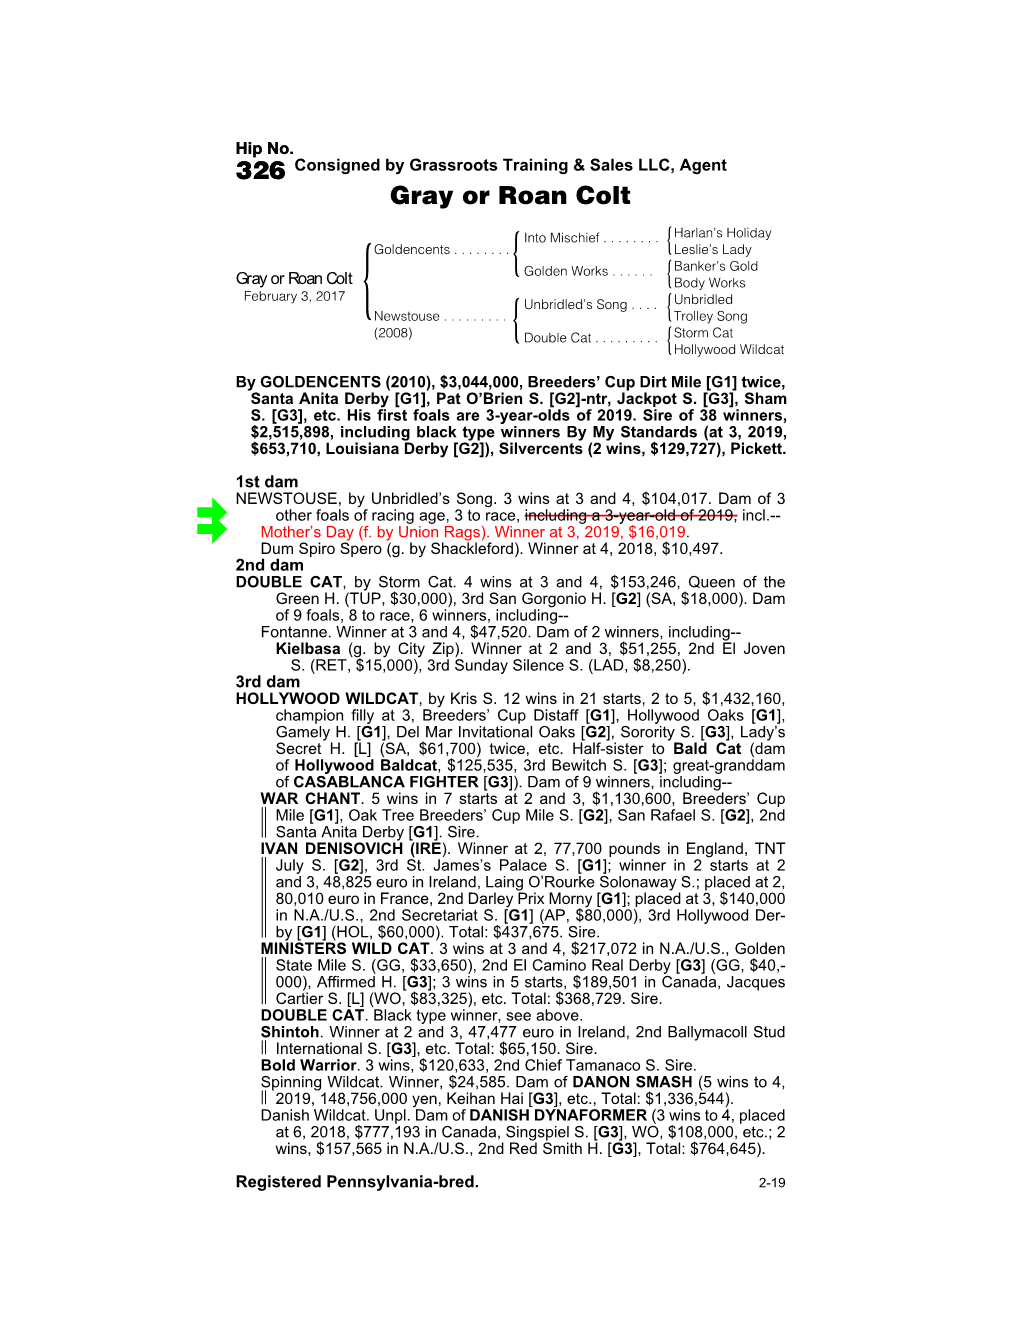 326 Consigned by Grassroots Training & Sales LLC, Agent Gray Or Roan Colt